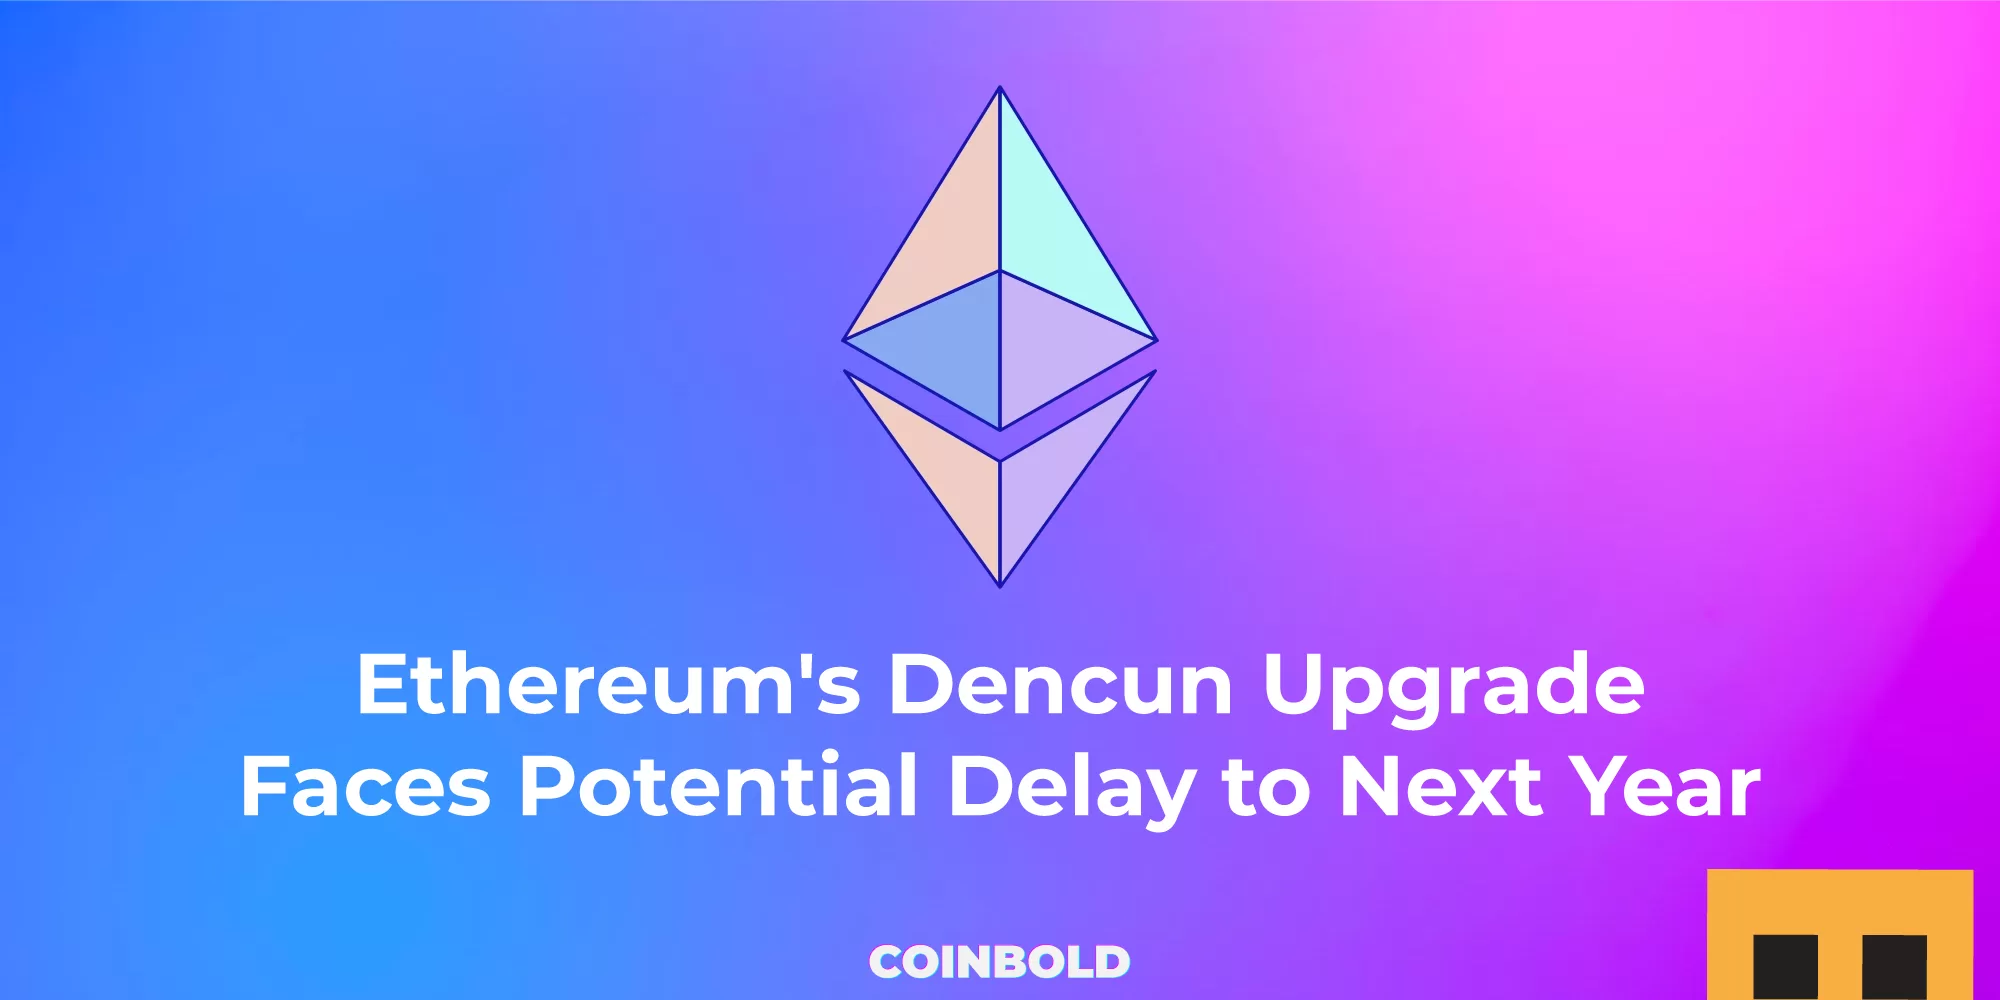 Ethereum's Dencun Upgrade Faces Potential Delay to Next Year